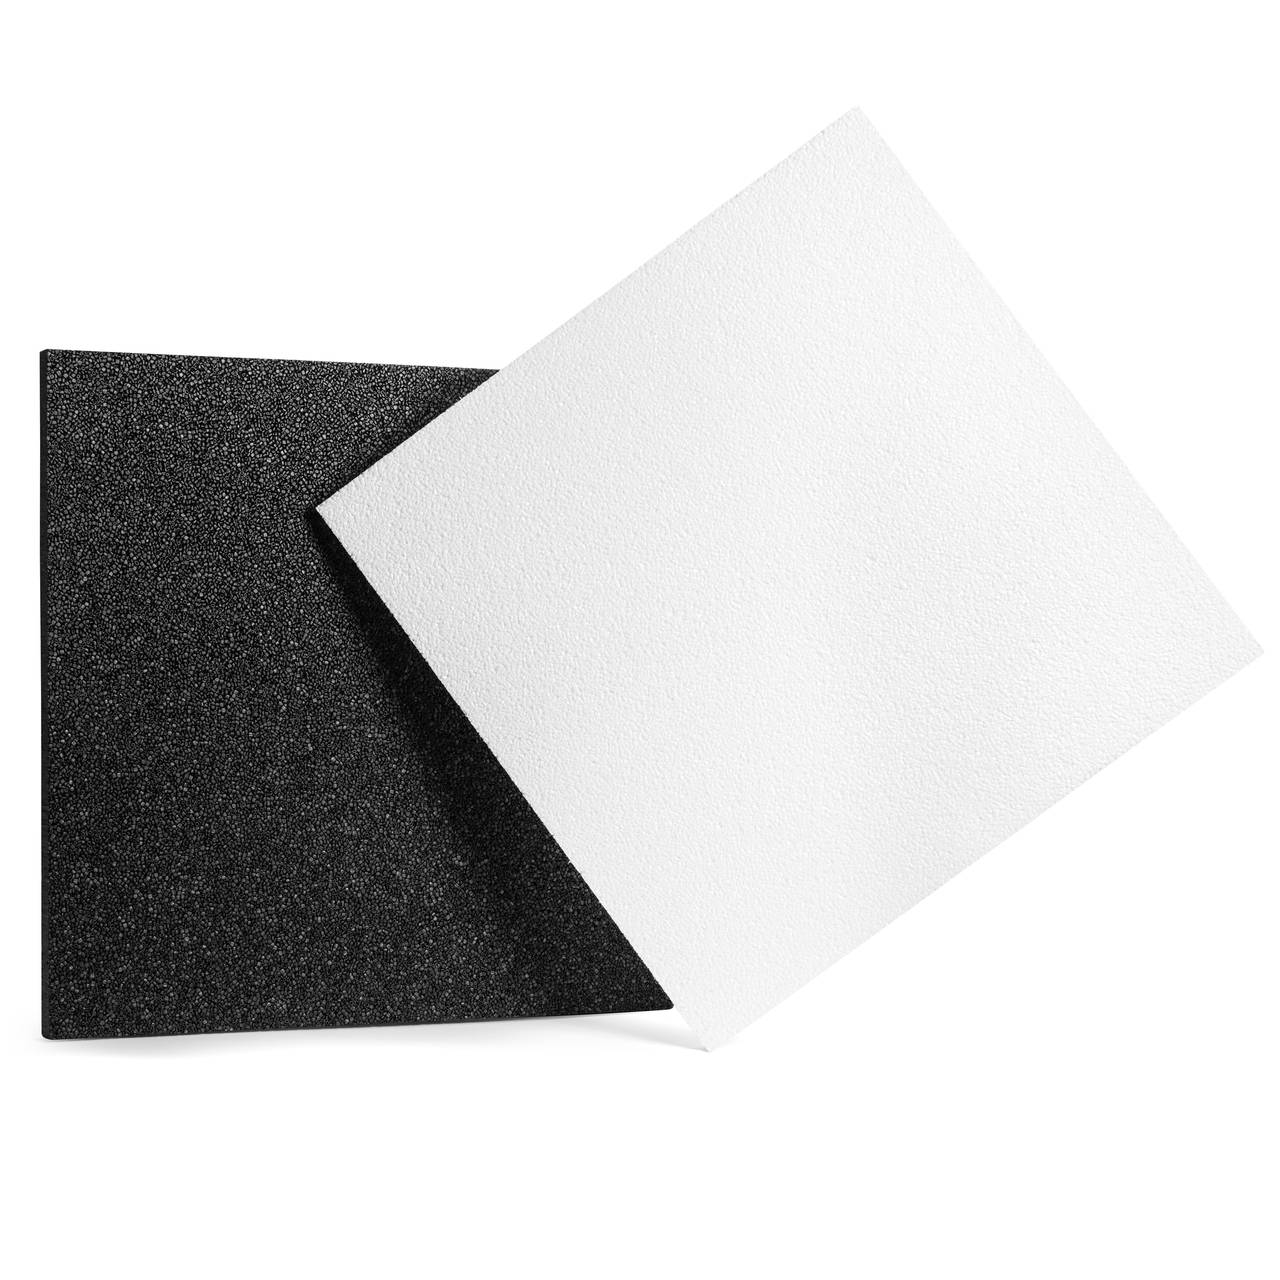 sound blocking and absorbing panel